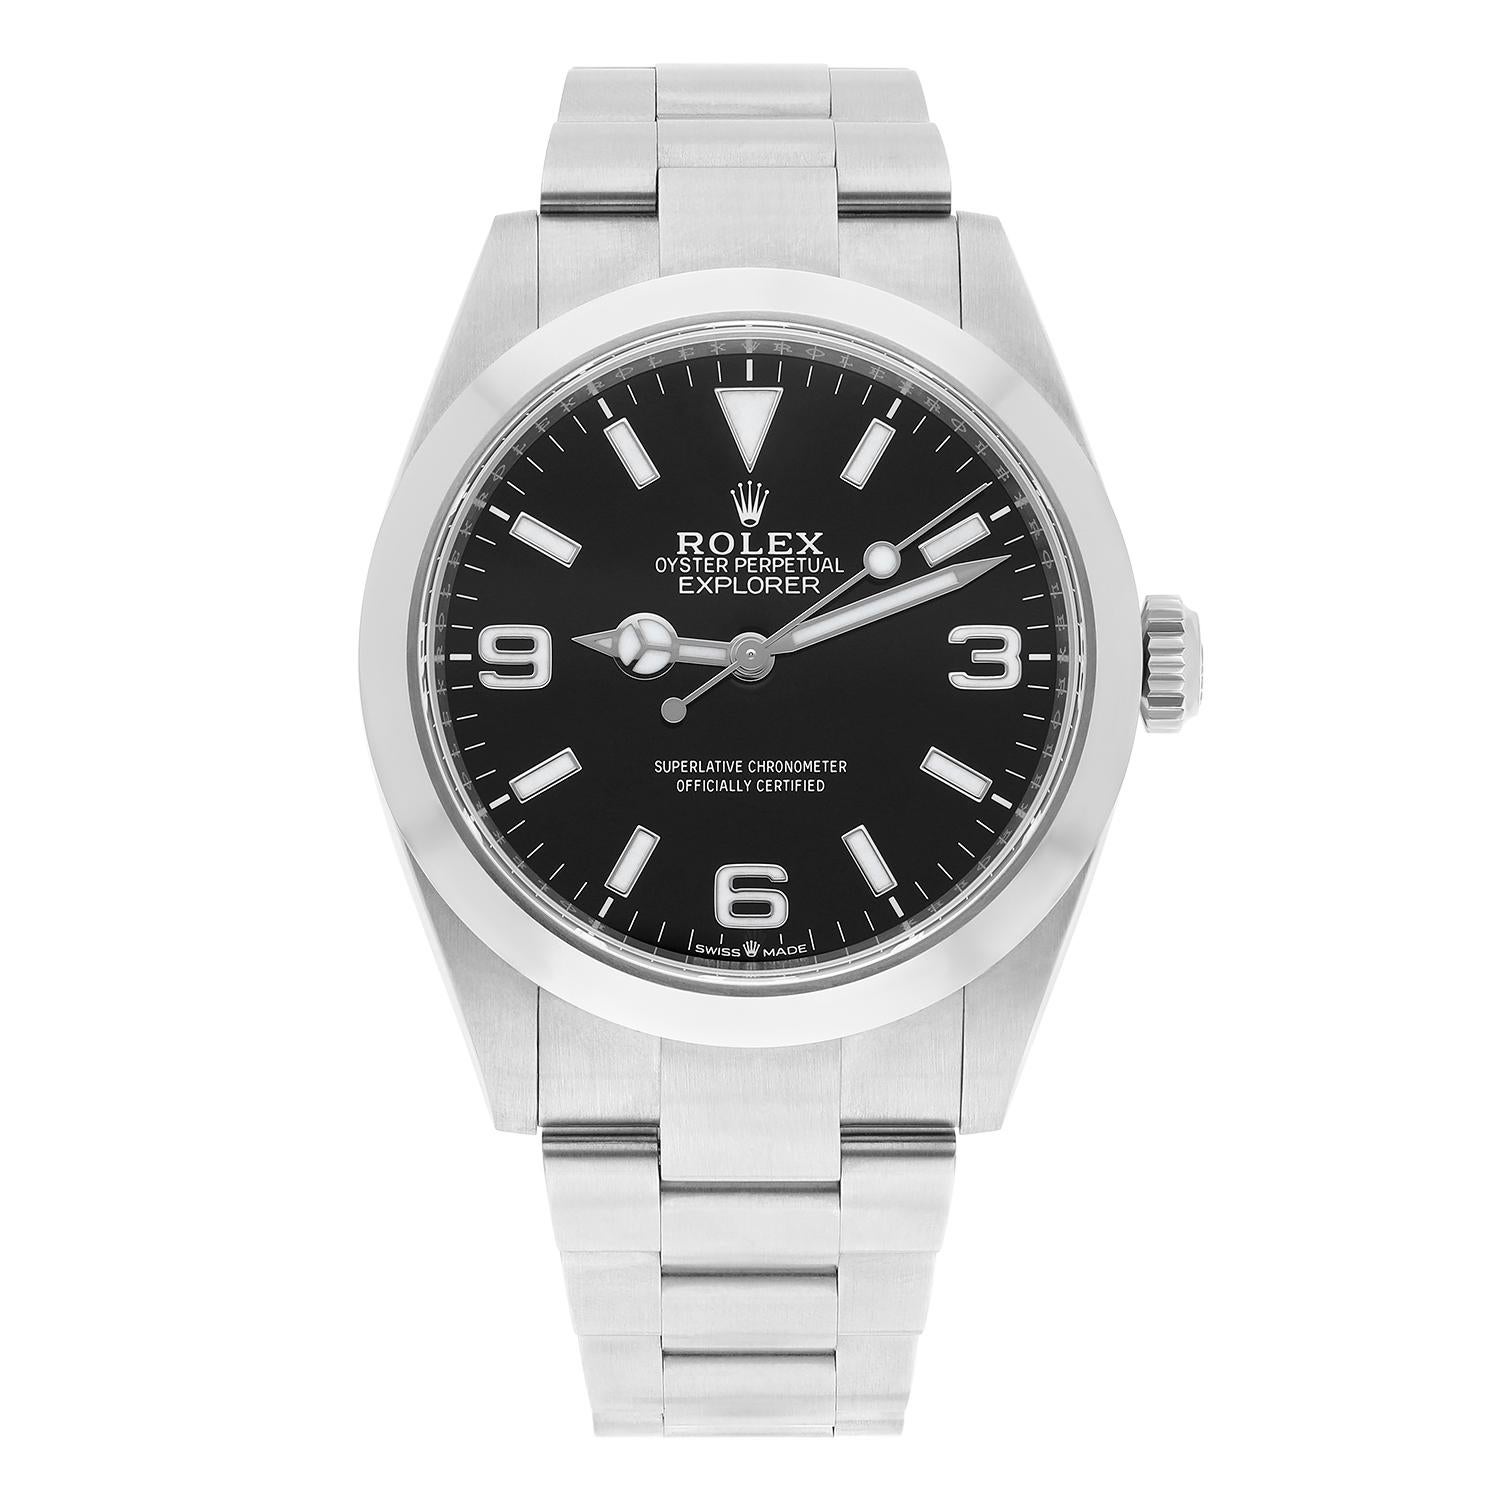 Silver-tone stainless steel case with a silver-tone stainless steel oyster bracelet. Fixed silver-tone stainless steel bezel. Black dial with silver-tone hands and index hour markers. Minute markers around the outer rim. Dial Type: Analog.